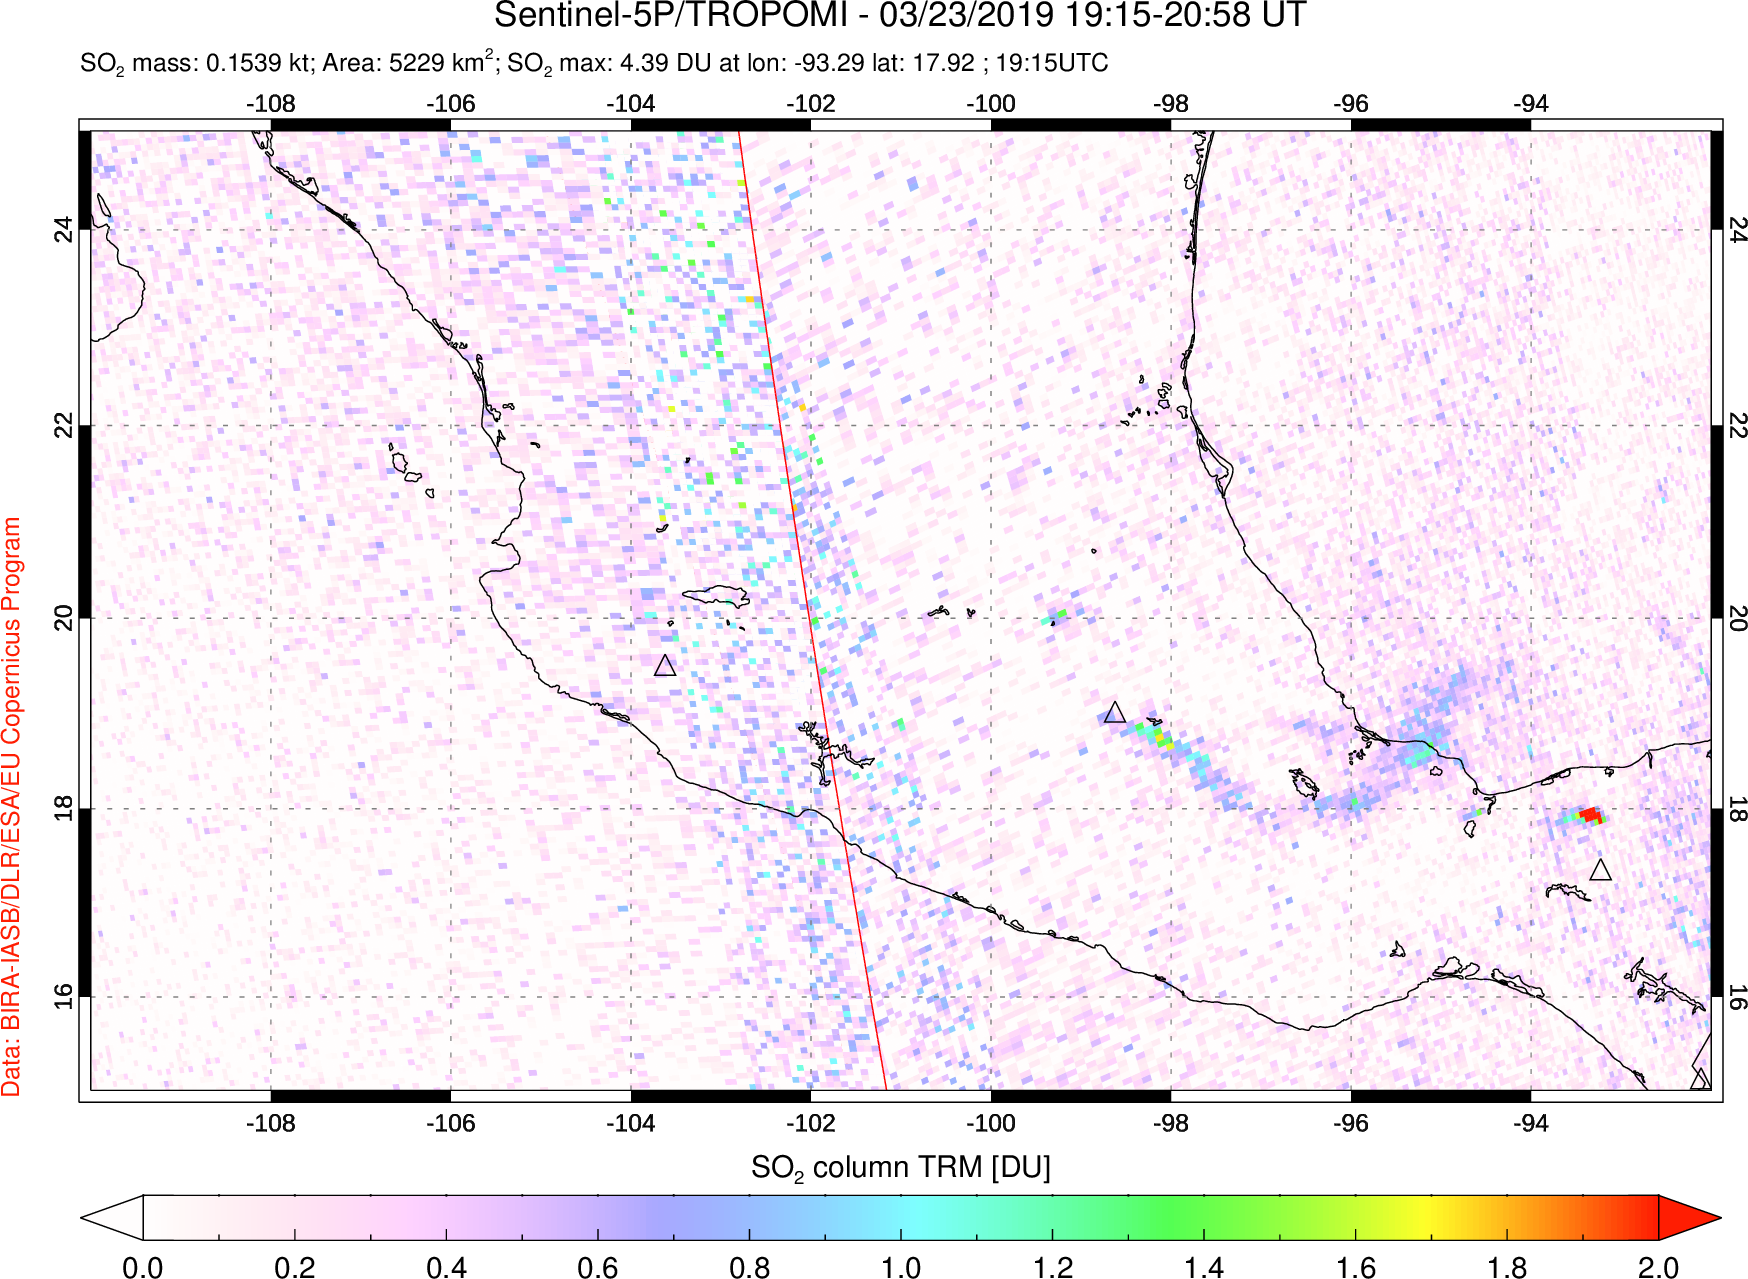 A sulfur dioxide image over Mexico on Mar 23, 2019.